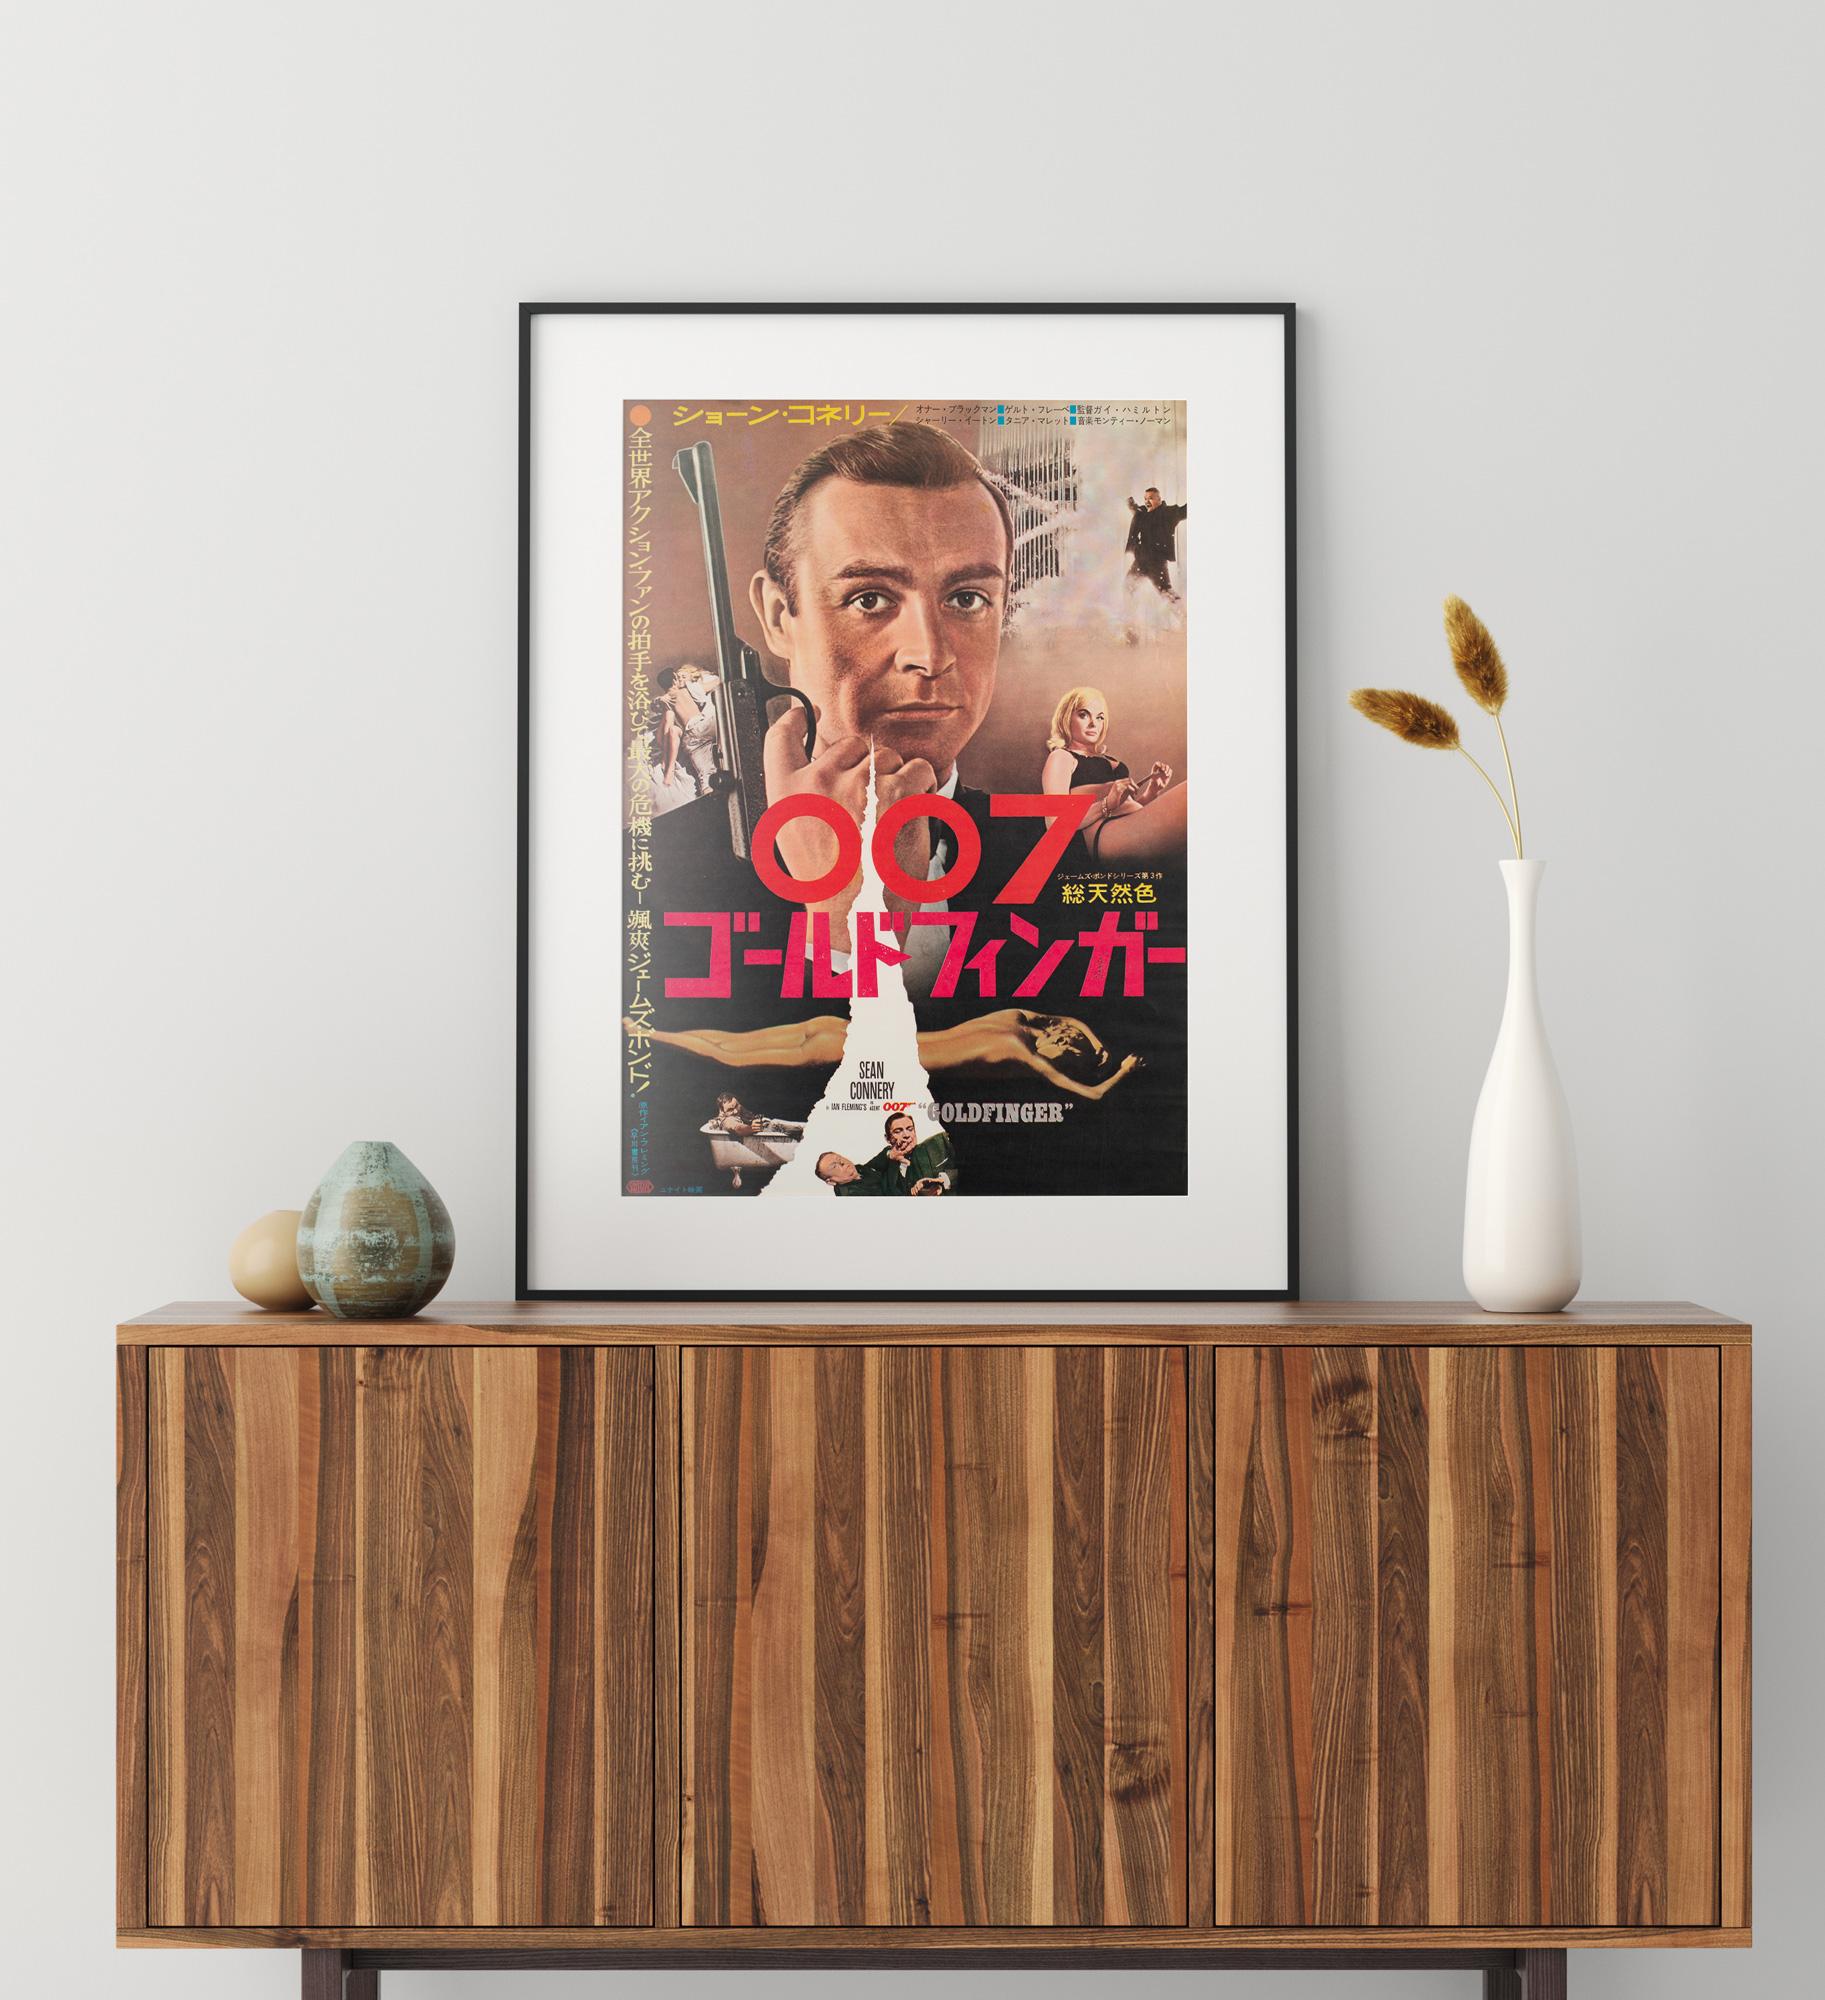 Fab first-year-of-release Japanese film poster for James Bond's 1964 film Goldfinger, arguably one of his finest outings. A rare and highly collectible item.

This original vintage movie poster is sized 20 x 28 1/2 inches. It will be sent rolled